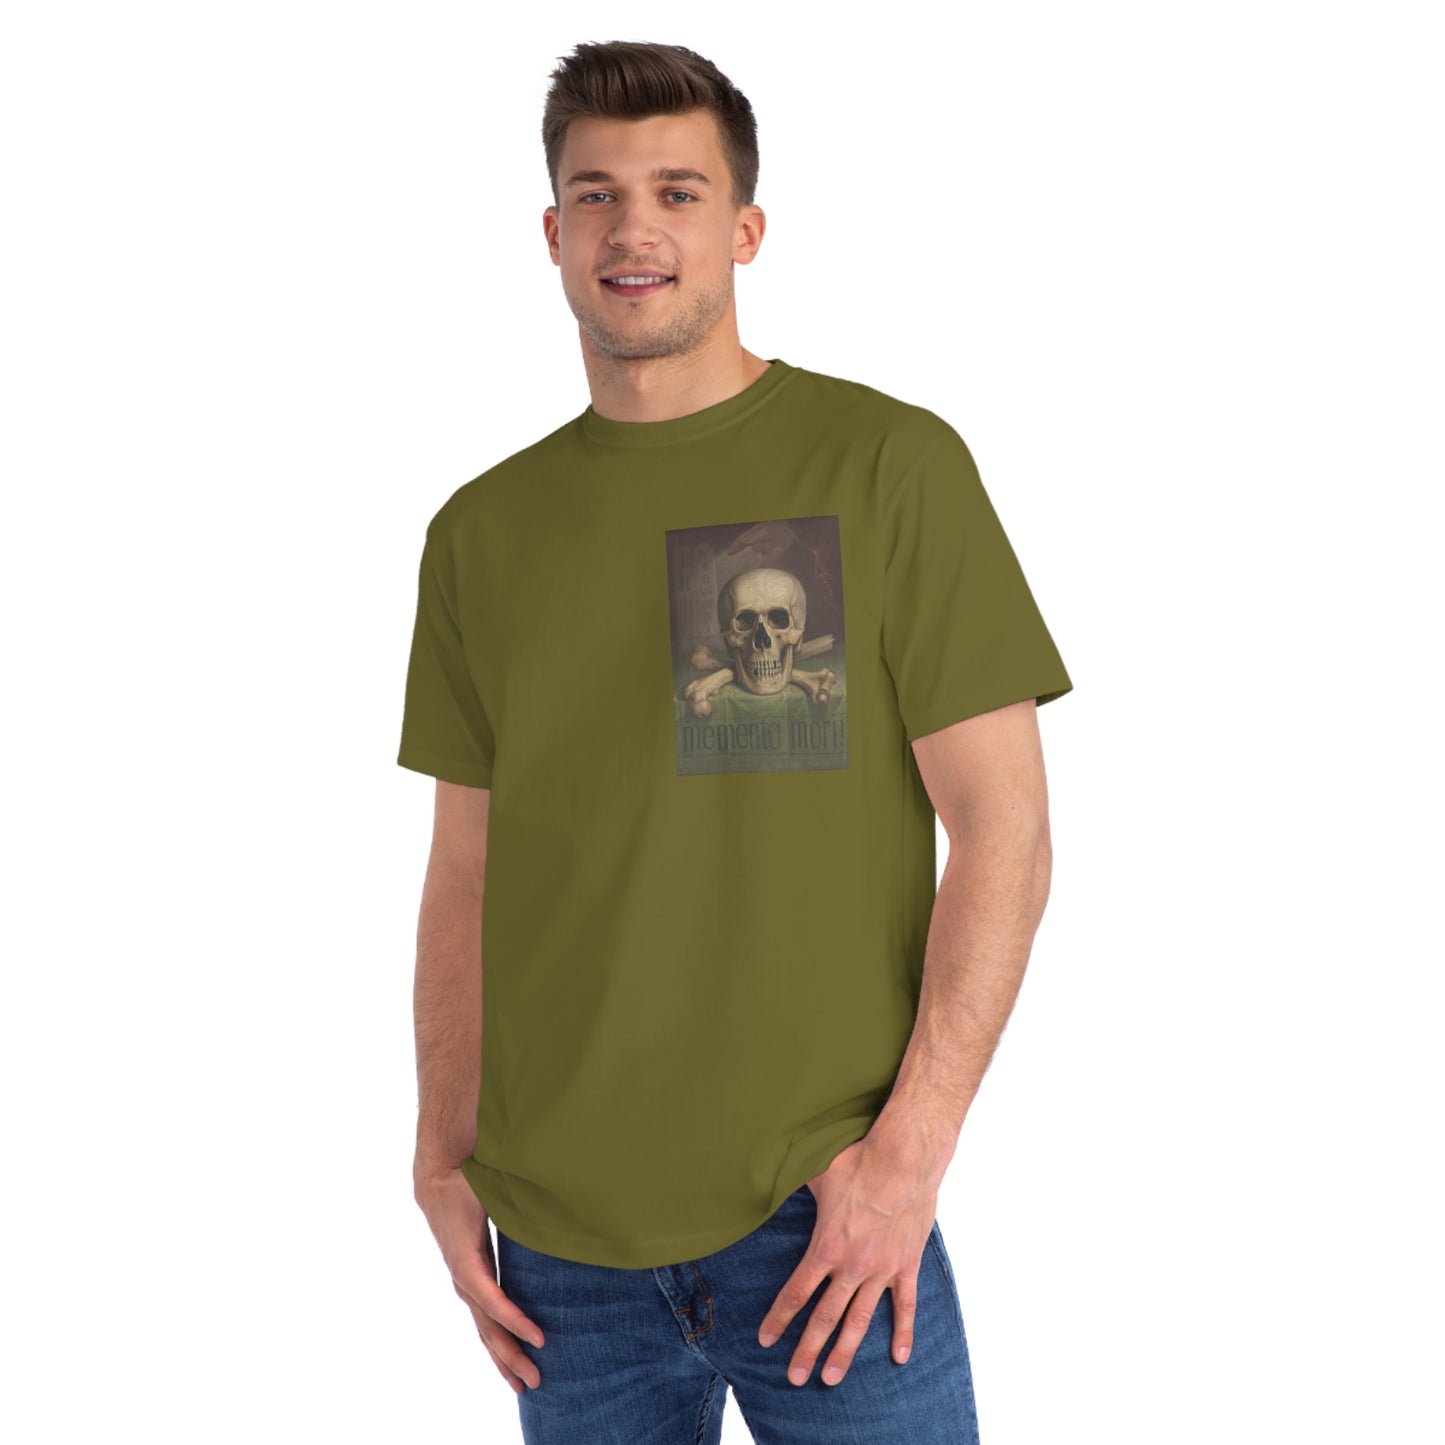 a man wearing a green t - shirt with a skull on it